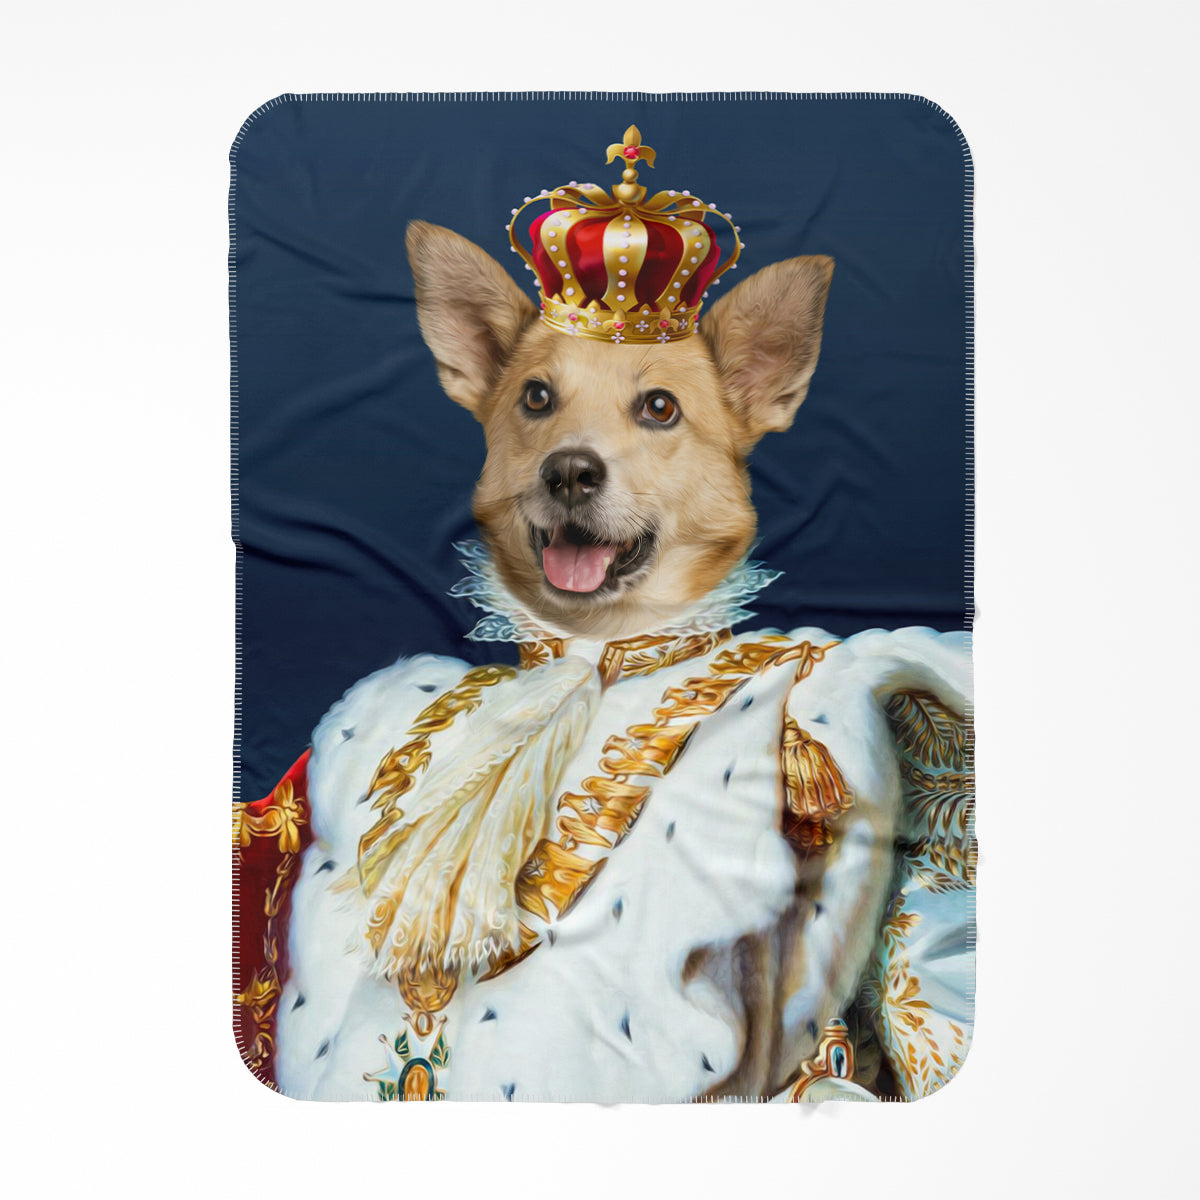 The Supreme: Custom Pet Blanket - Paw & Glory - #pet portraits# - #dog portraits# - #pet portraits uk#Pawandglory, Pet art blanket,dog face on a blanket, blankets with pets on them, put my dog on a blanket, pet picture on a blanket, put your dog on a blanket